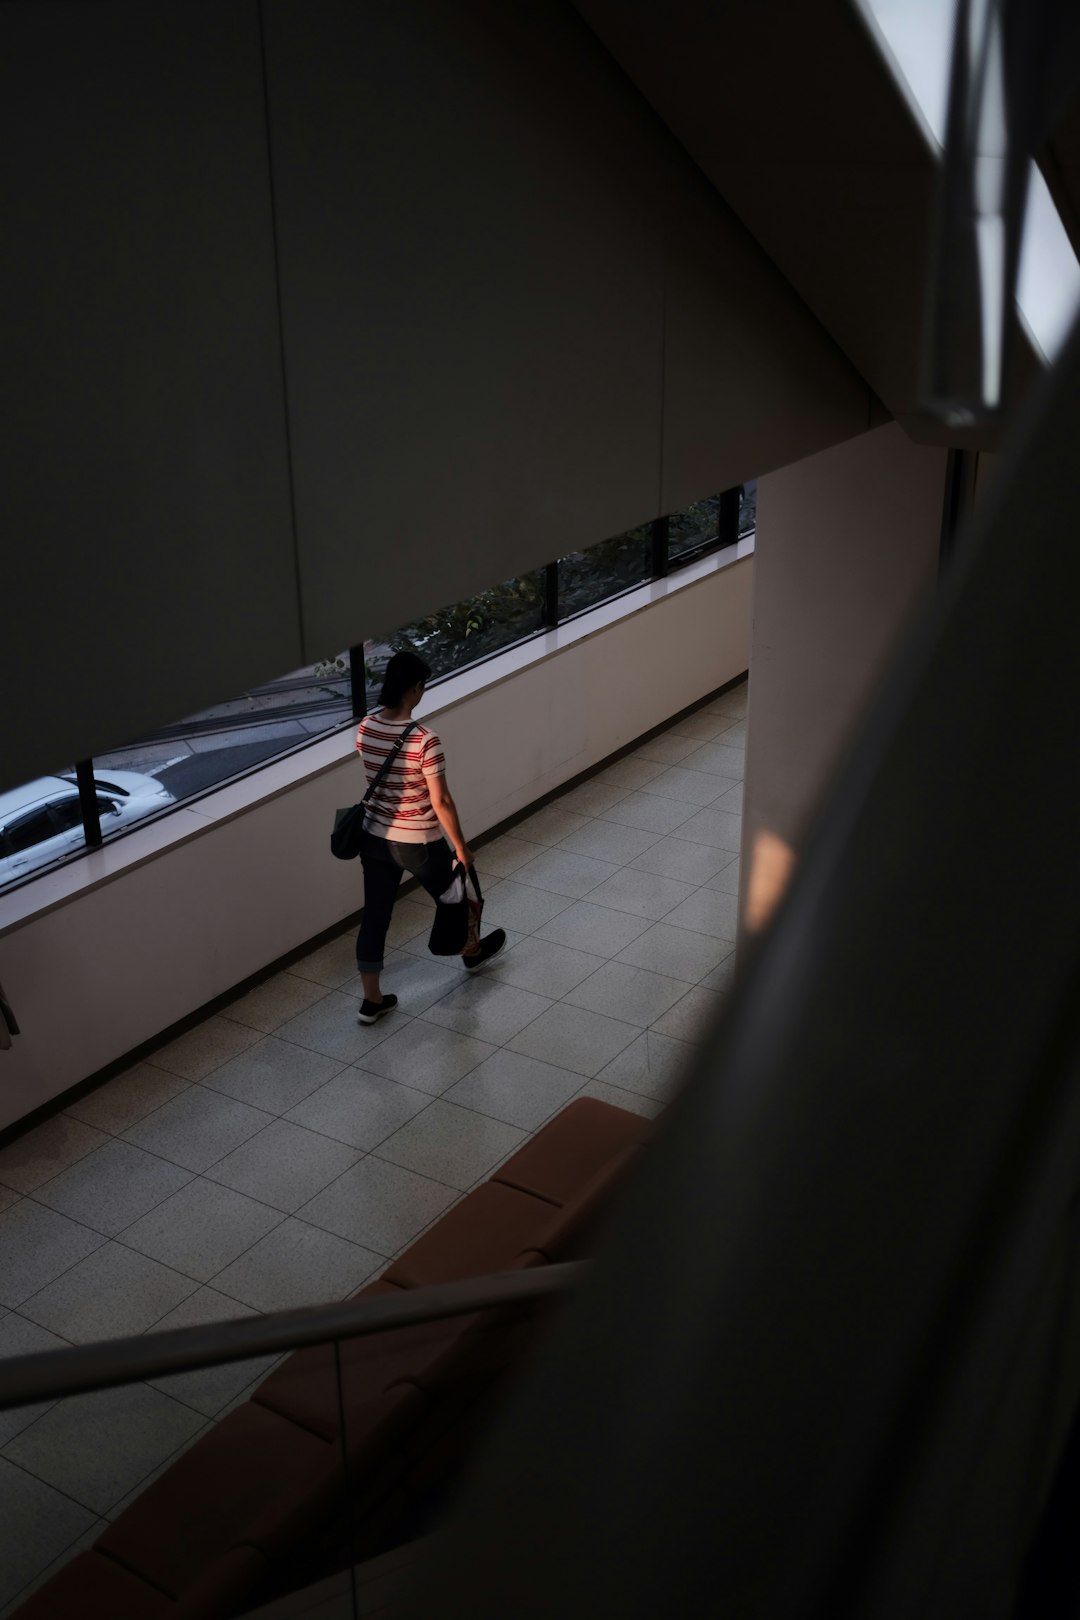 walking person in striped shirt carrying bag